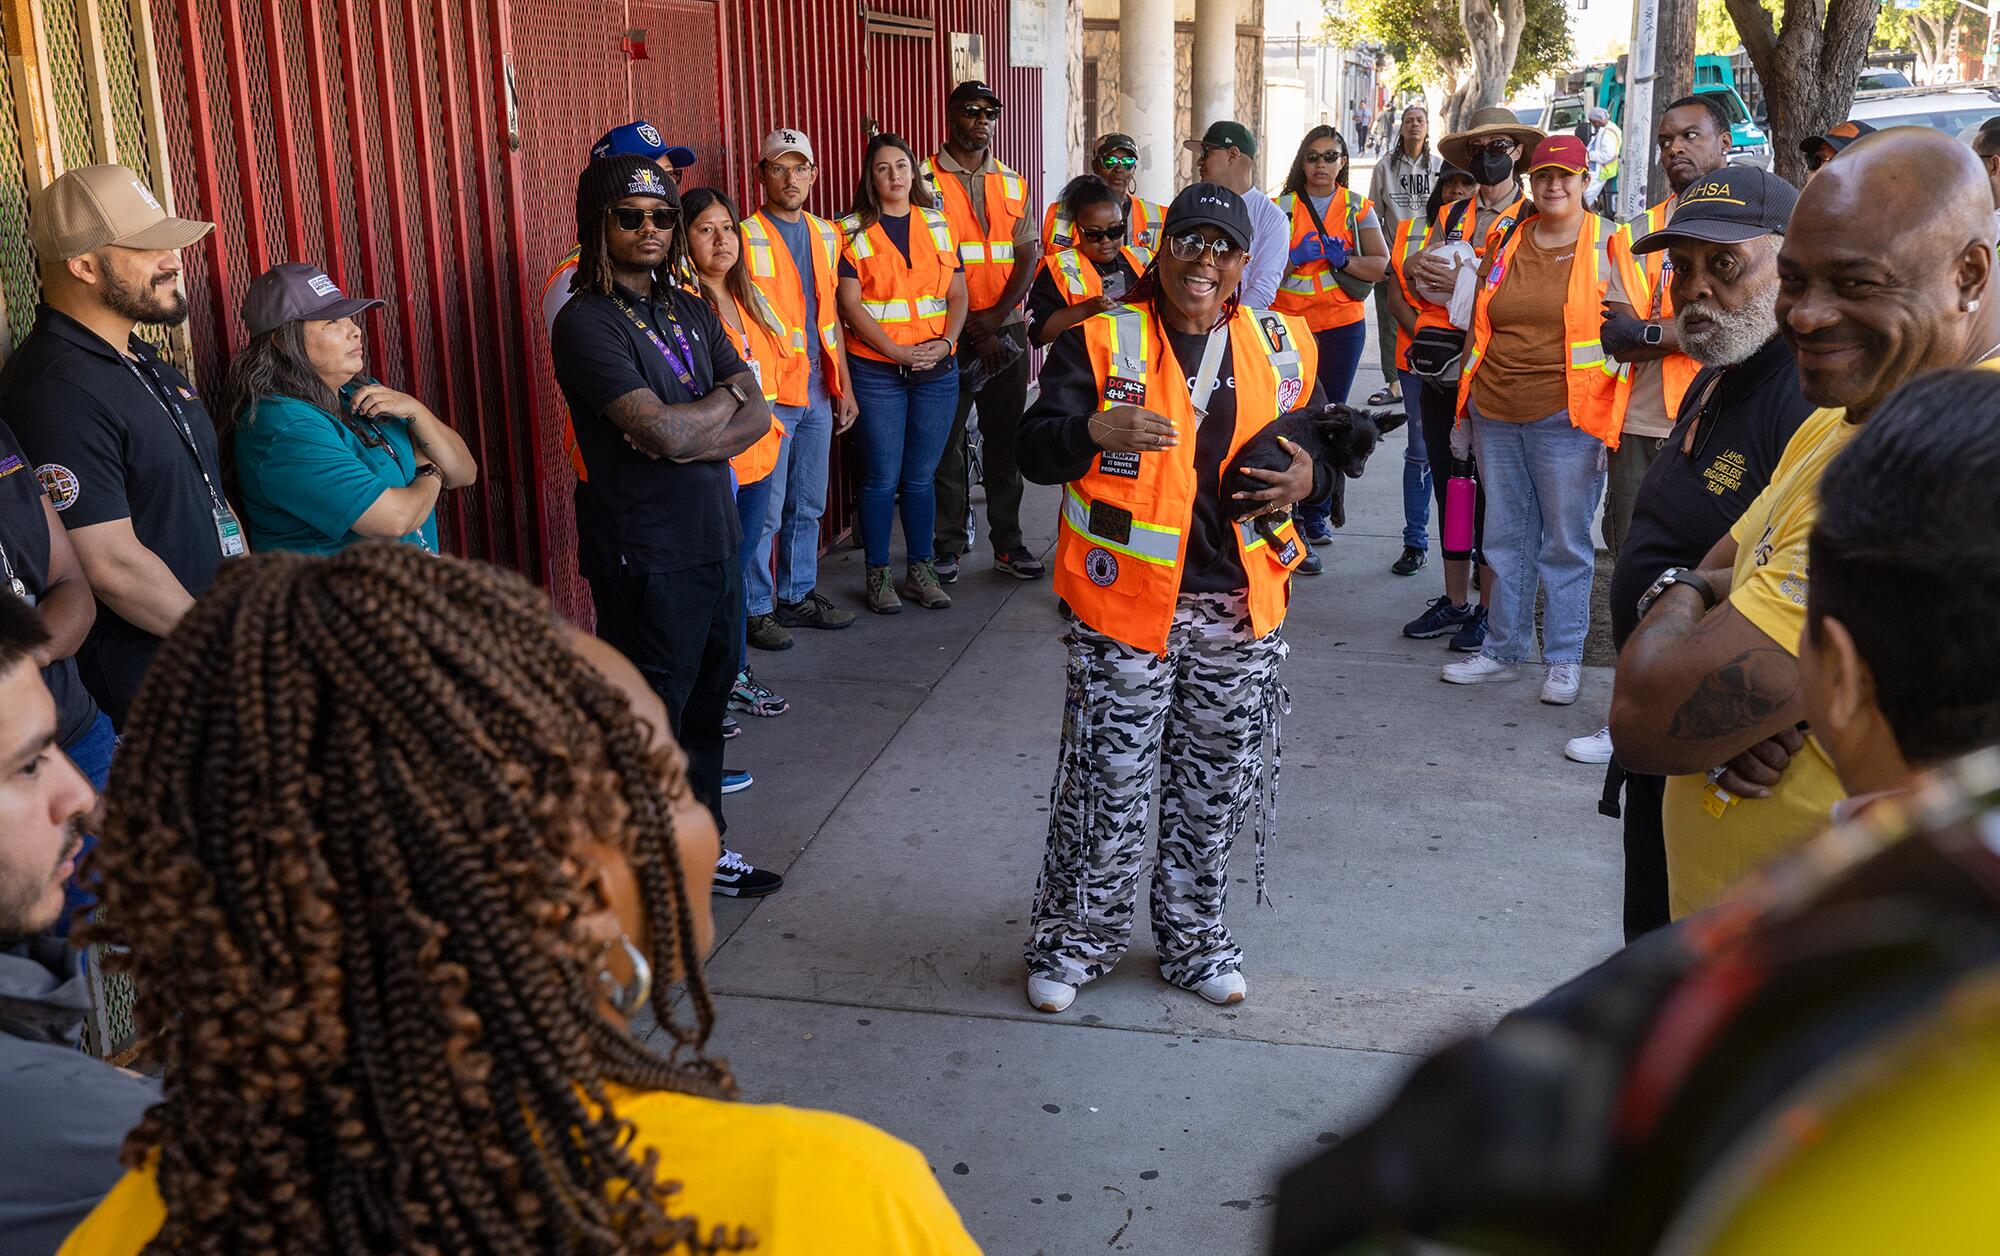 Inside Safe's Annetta Wells instructs employees before they enter a homeless encampment in South Los Angeles